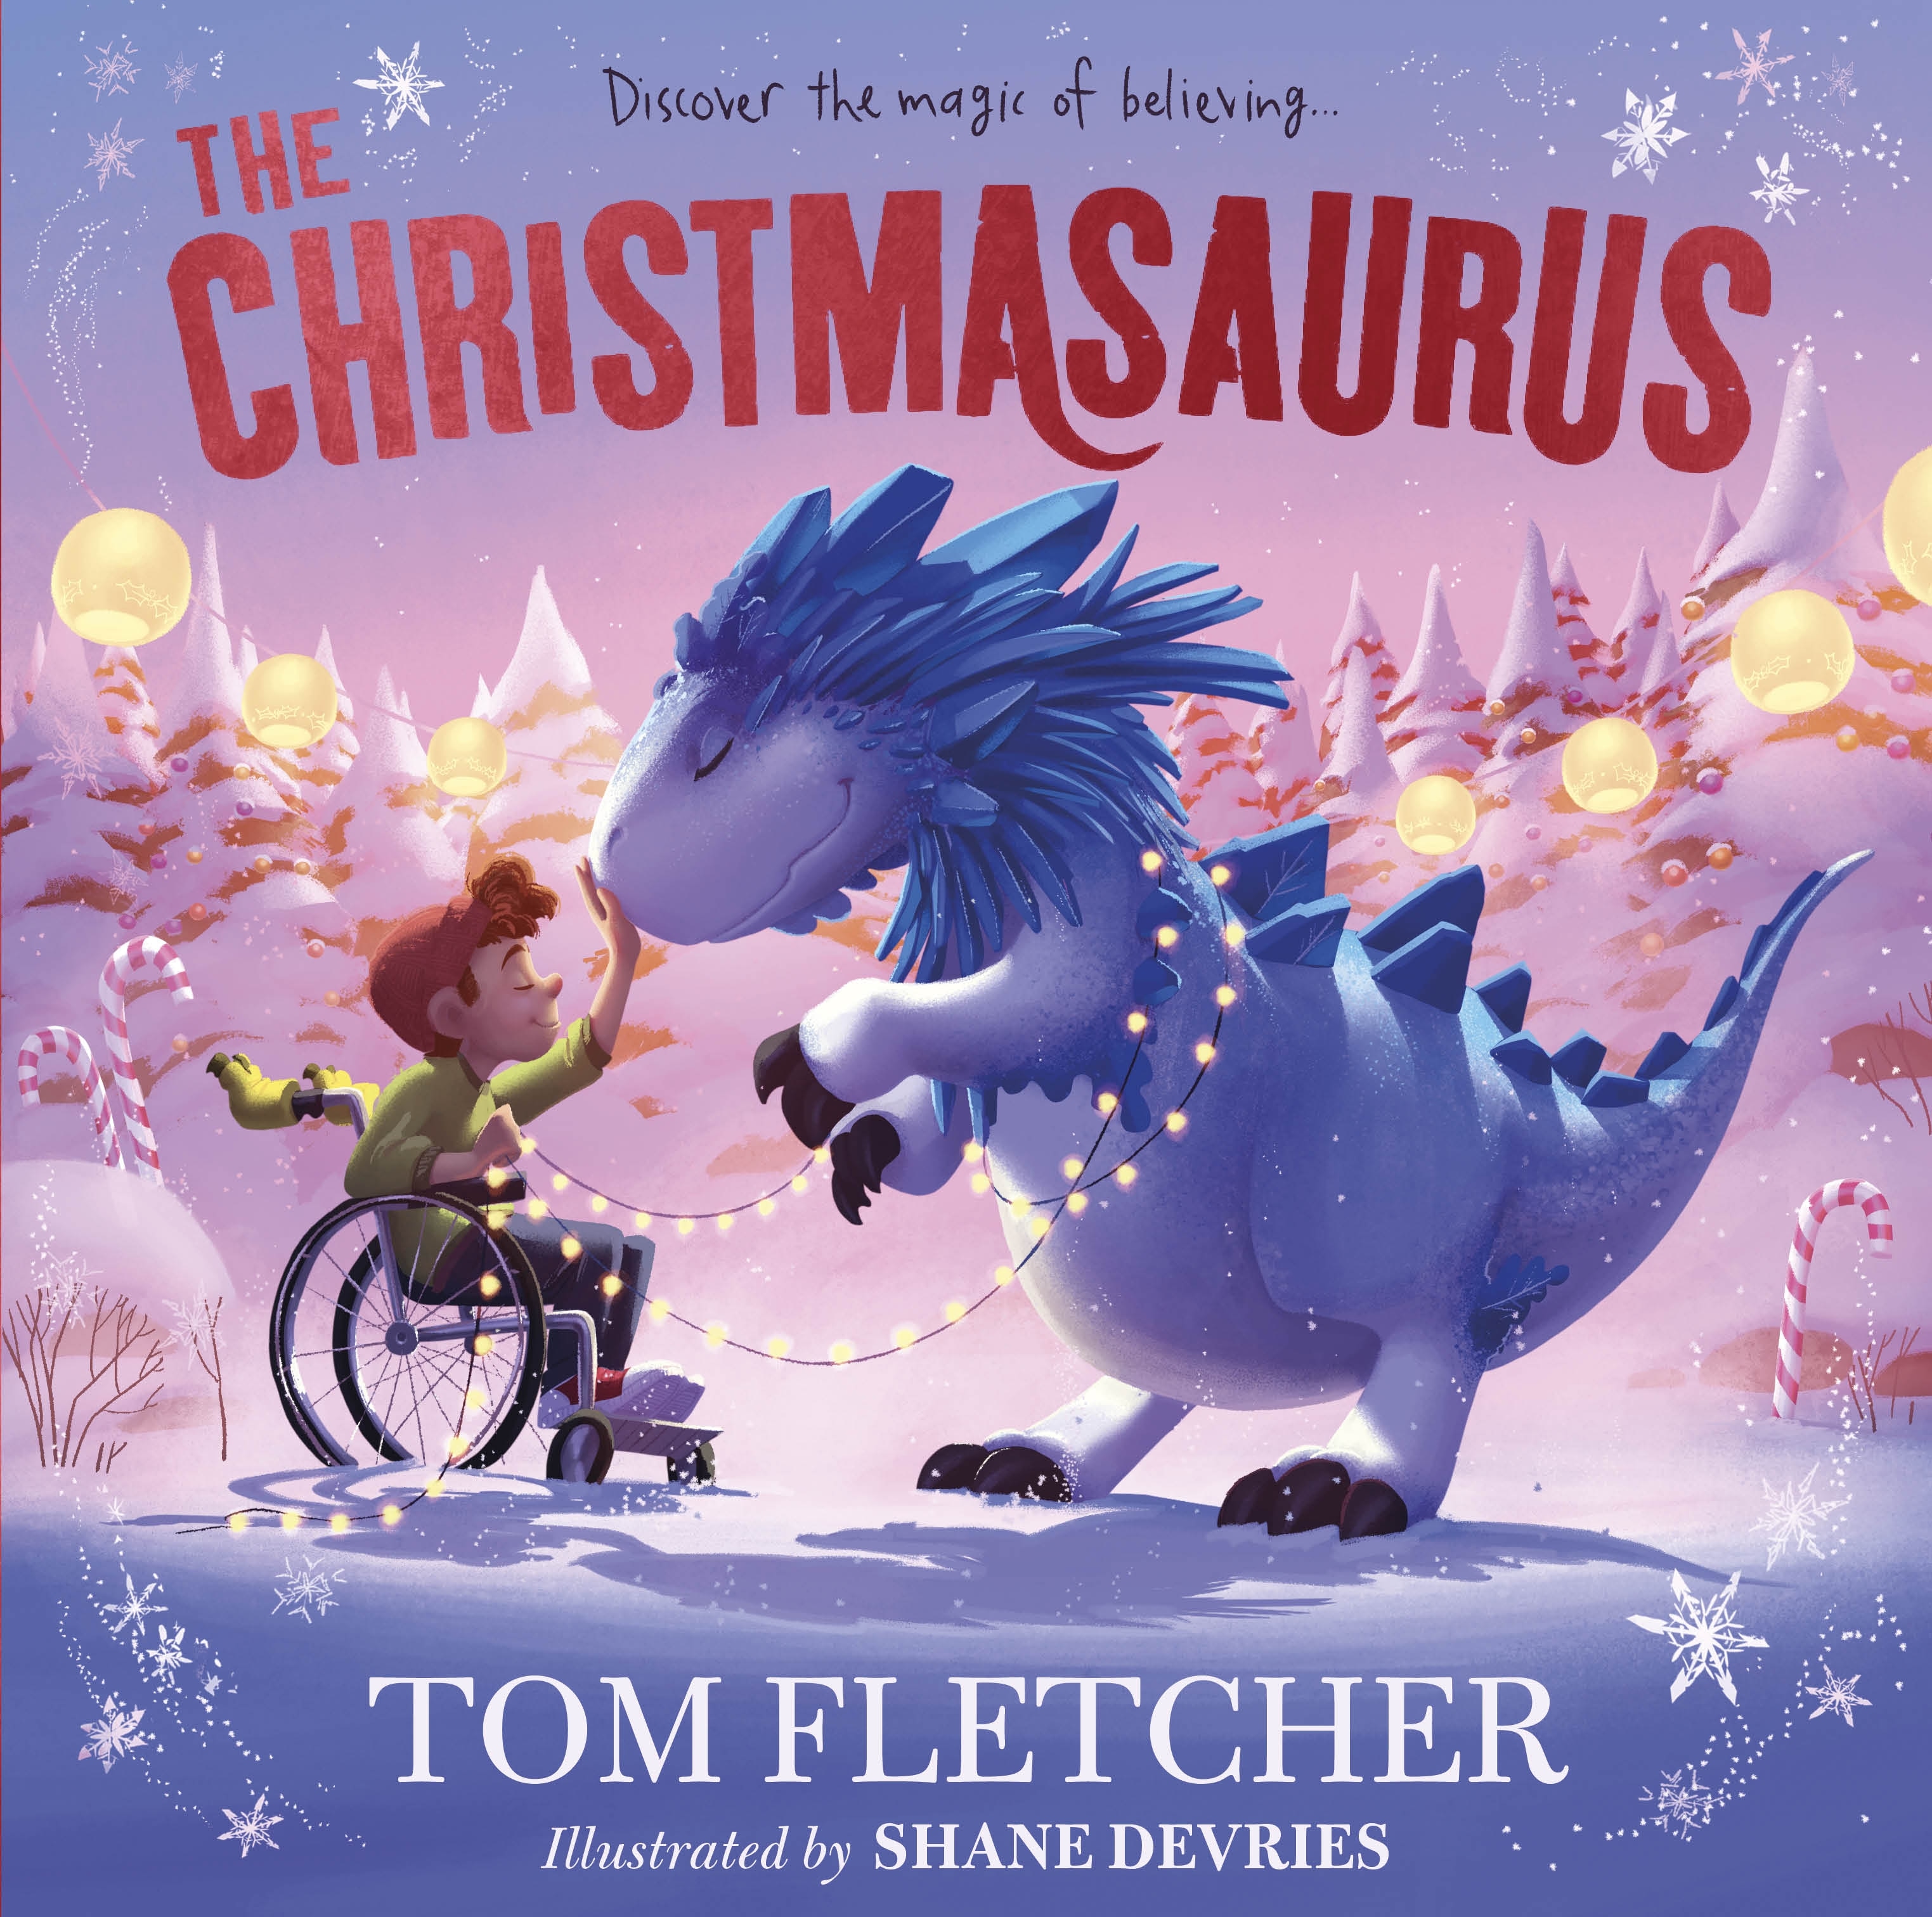 Book “The Christmasaurus” by Tom Fletcher — October 28, 2021